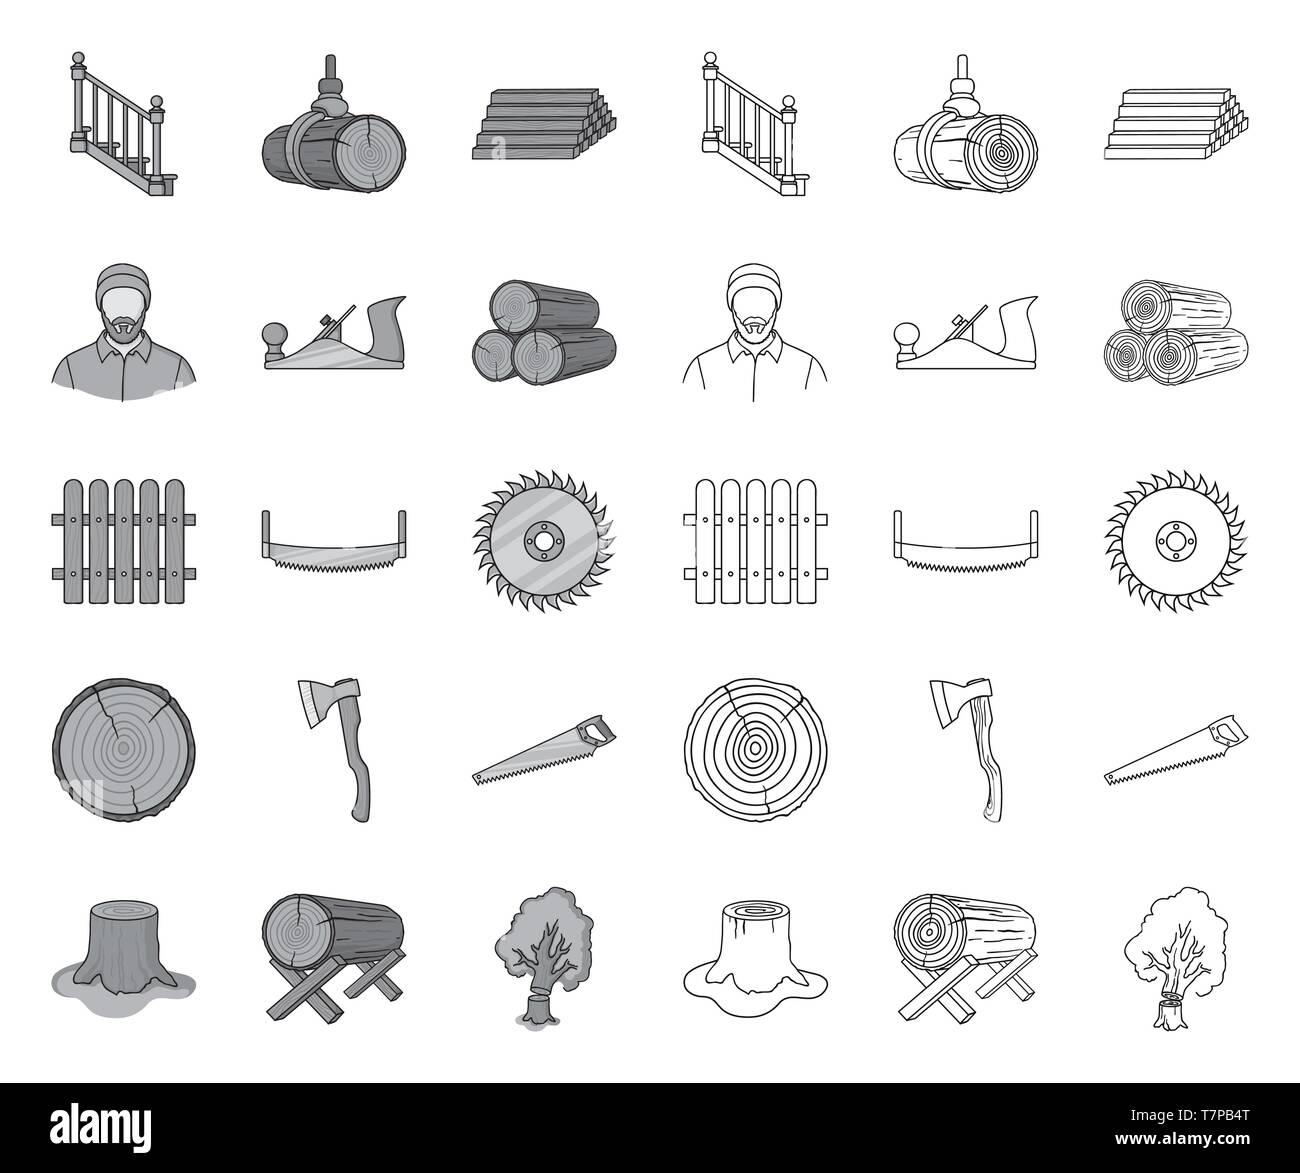 art,axe,chisel,collection,crane,cross,design,disc,equipment,falling,fence,goats,hand,hydraulic,icon,illustration,isolated,jack,logo,logs,lumber,lumbers,lumbrejack,mono,outline,plane,processing,product,production,saw,sawing,sawmill,section,set,sign,stack,stairs,stump,symbol,timber,tools,tree,two-man,vector,web Vector Vectors , Stock Vector